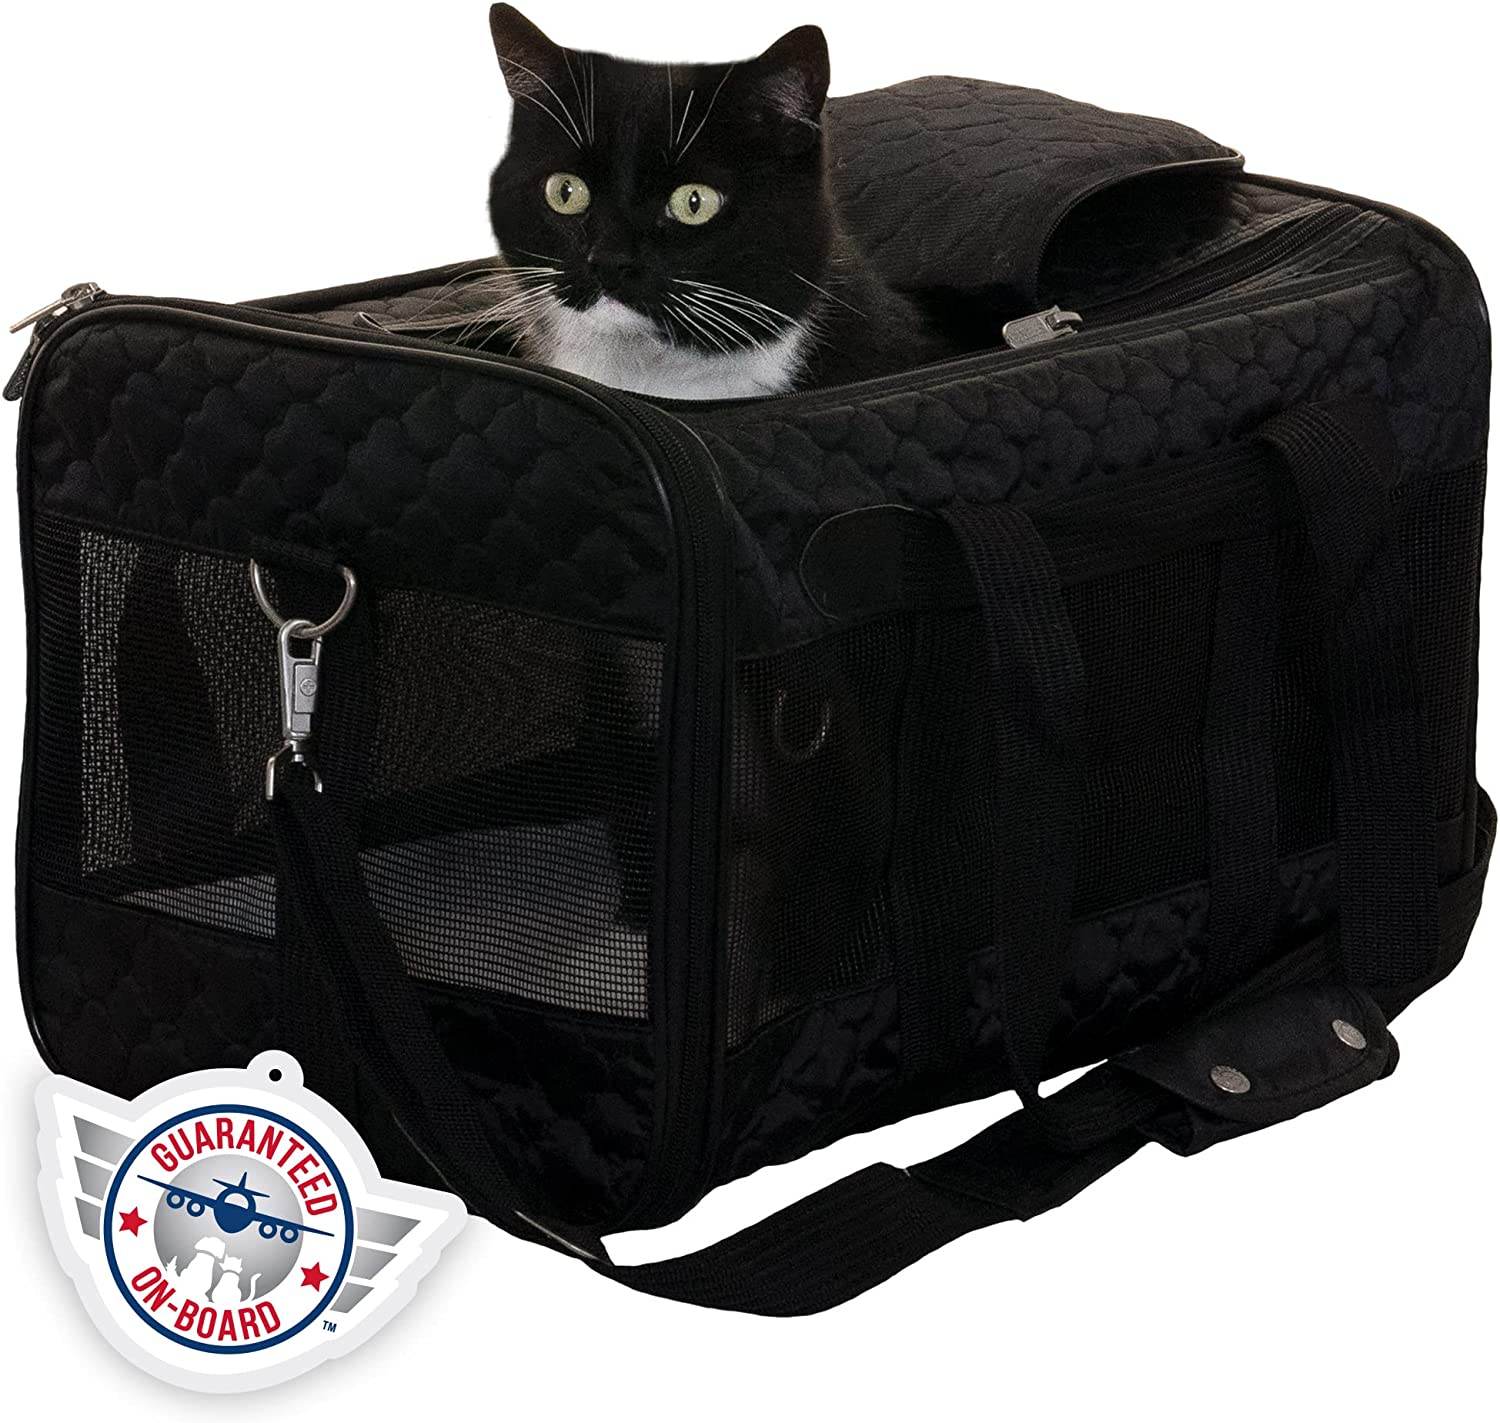 black and white cat sticking out of a black soft-sided cat carrier